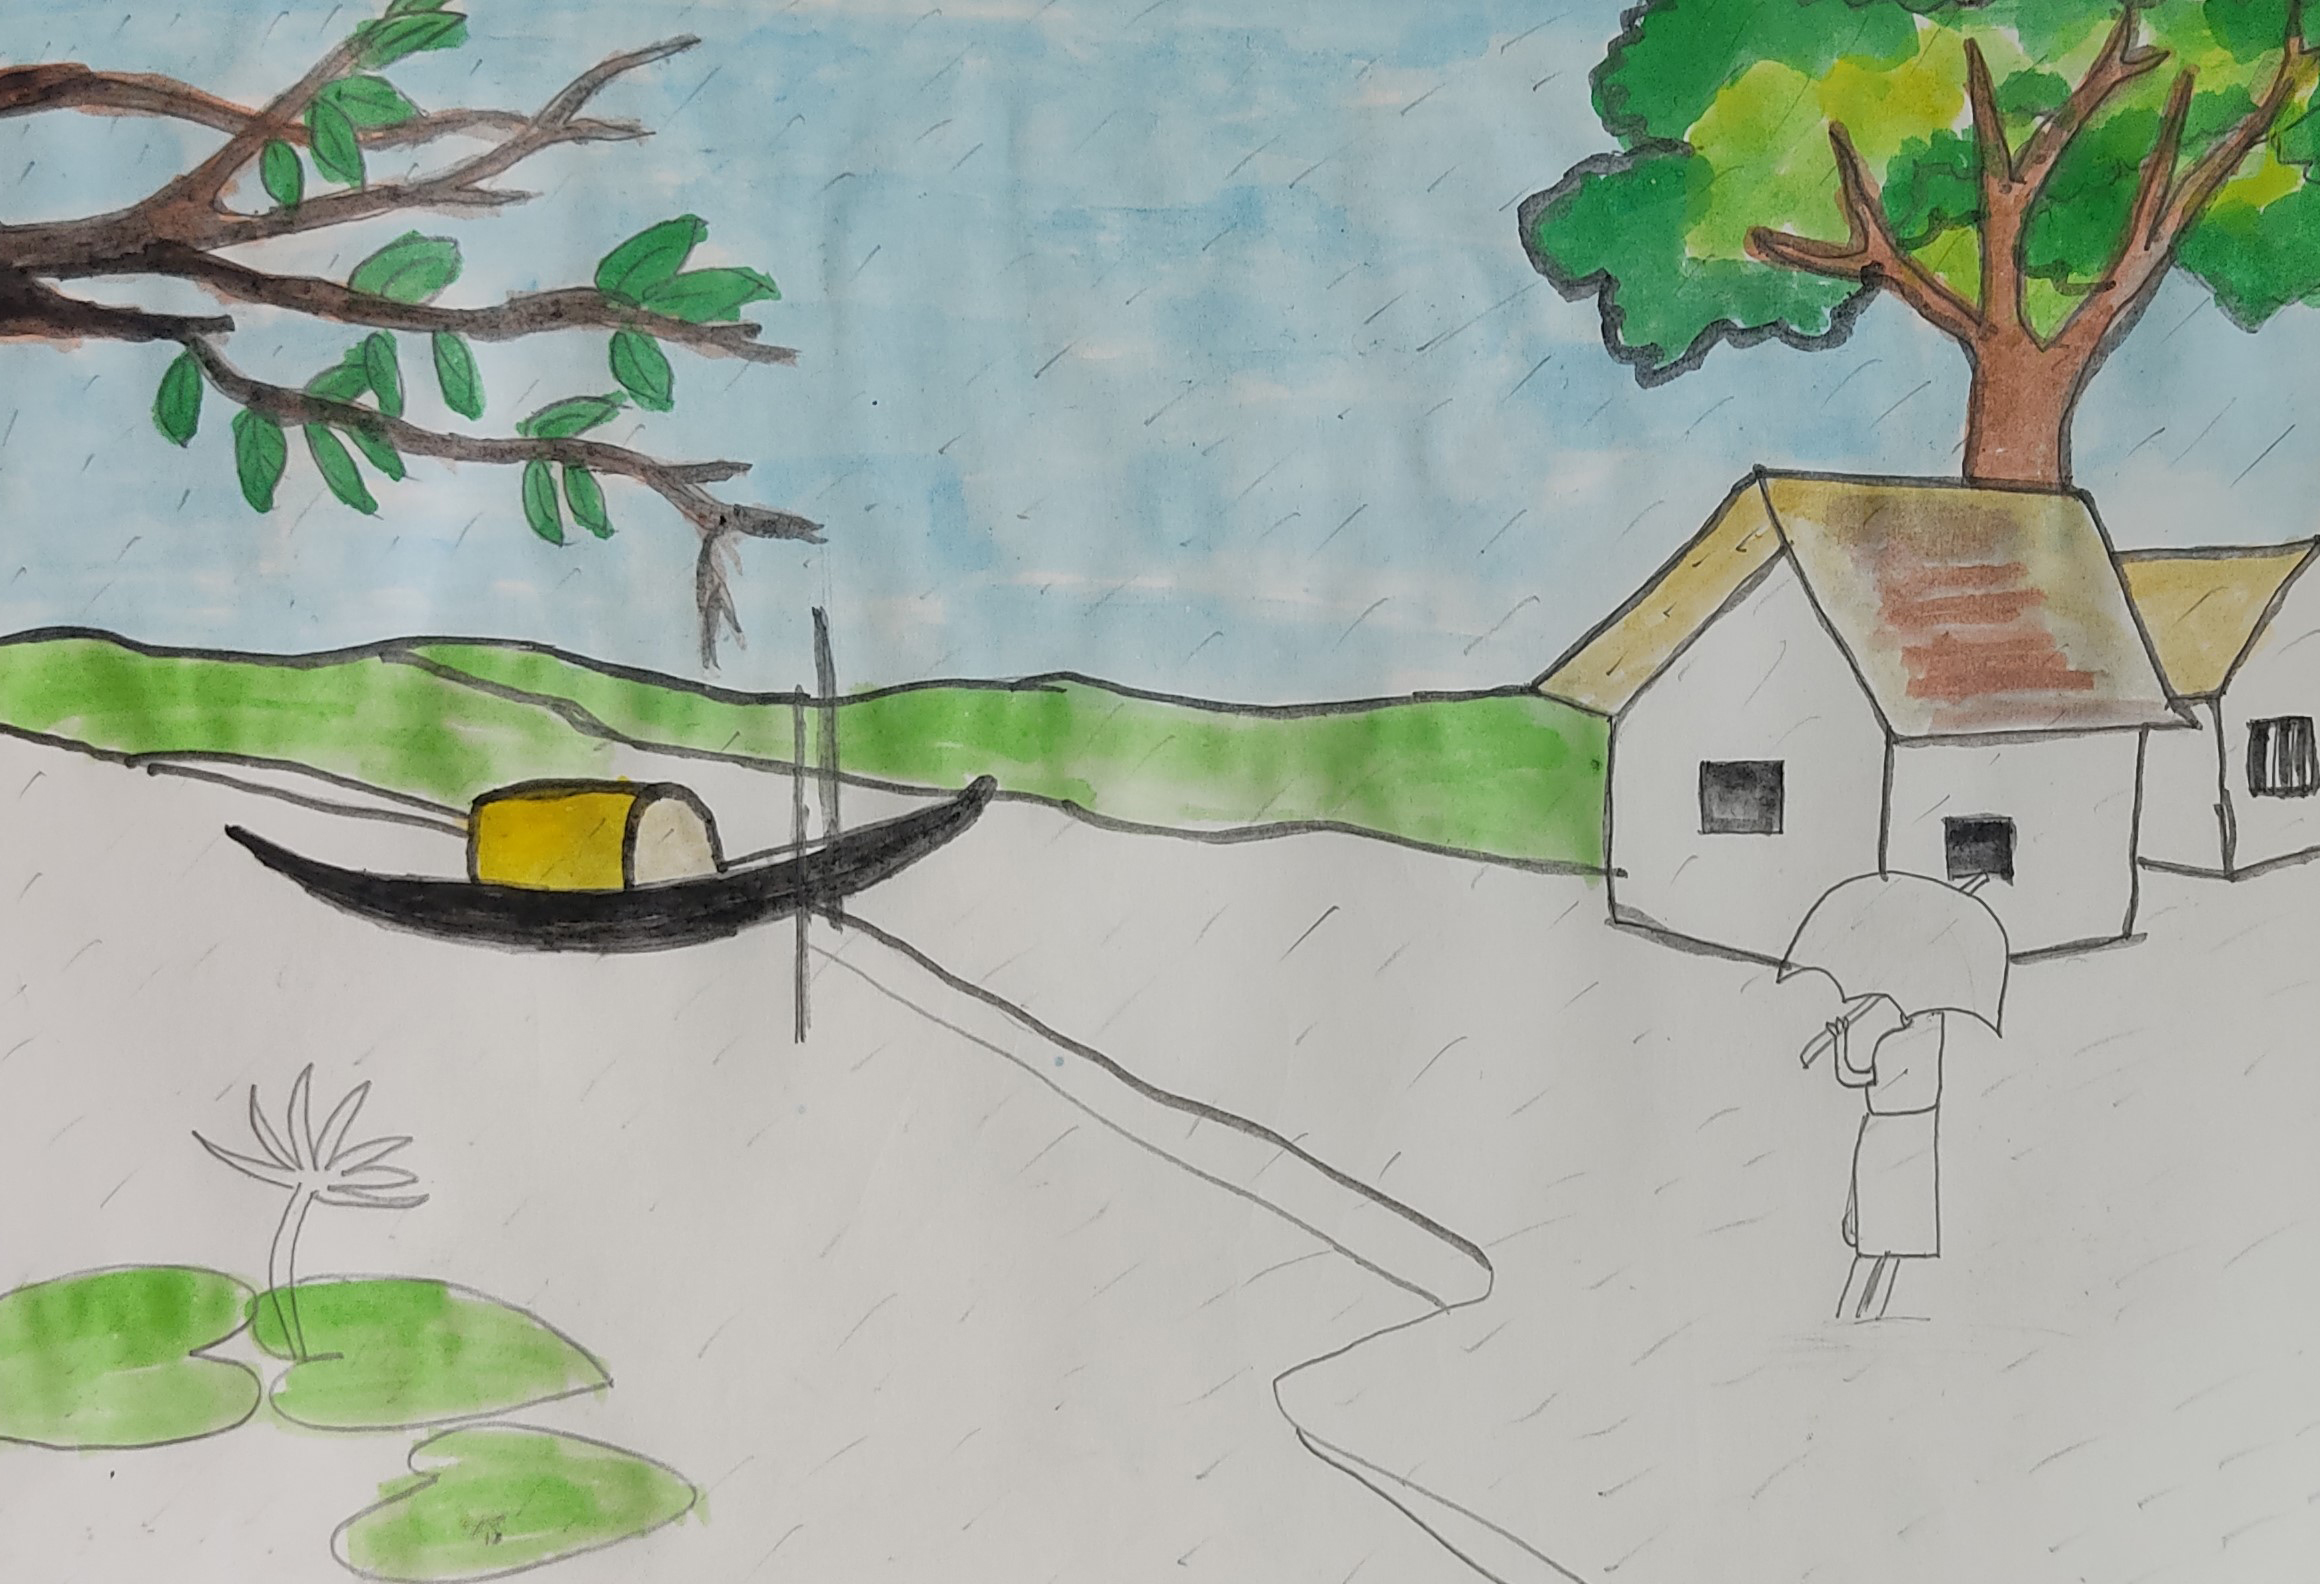 How to Draw Village Scenery, Easy Village Drawing - YouTube